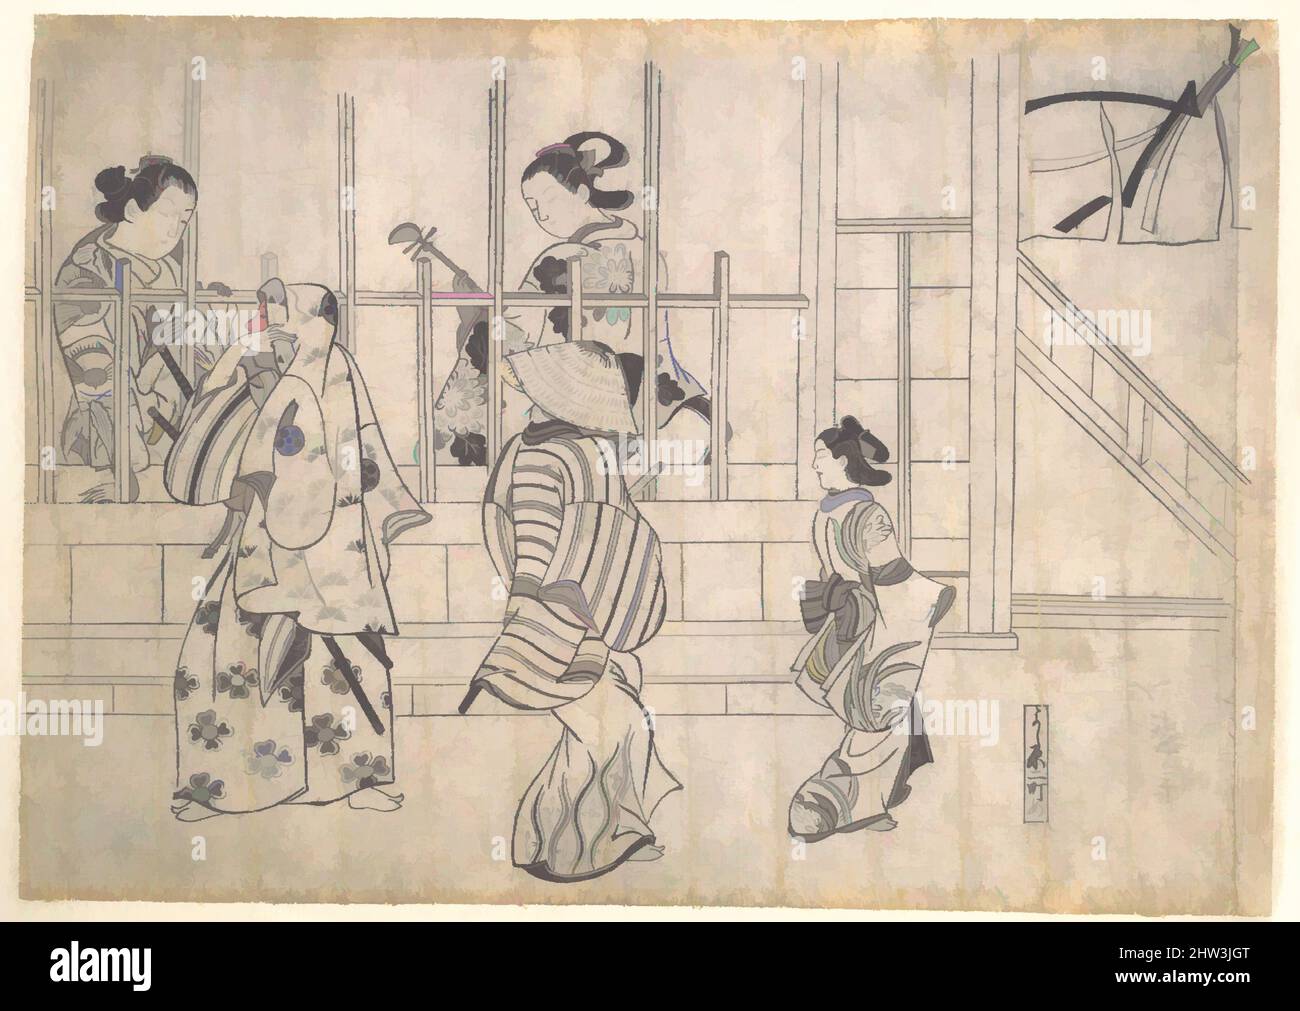 Art inspired by Street Scene in Yoshiwara, Edo period (1615–1868), late 17th century, Japan, Monochrome woodblock print; ink on paper, 10 3/4 x 15 1/4 in. (27.3 x 38.7 cm), Prints, Hishikawa Moronobu (Japanese, died 1694), In this Yoshiwara scene by Moronobu, the originator of ukiyo-e, Classic works modernized by Artotop with a splash of modernity. Shapes, color and value, eye-catching visual impact on art. Emotions through freedom of artworks in a contemporary way. A timeless message pursuing a wildly creative new direction. Artists turning to the digital medium and creating the Artotop NFT Stock Photo